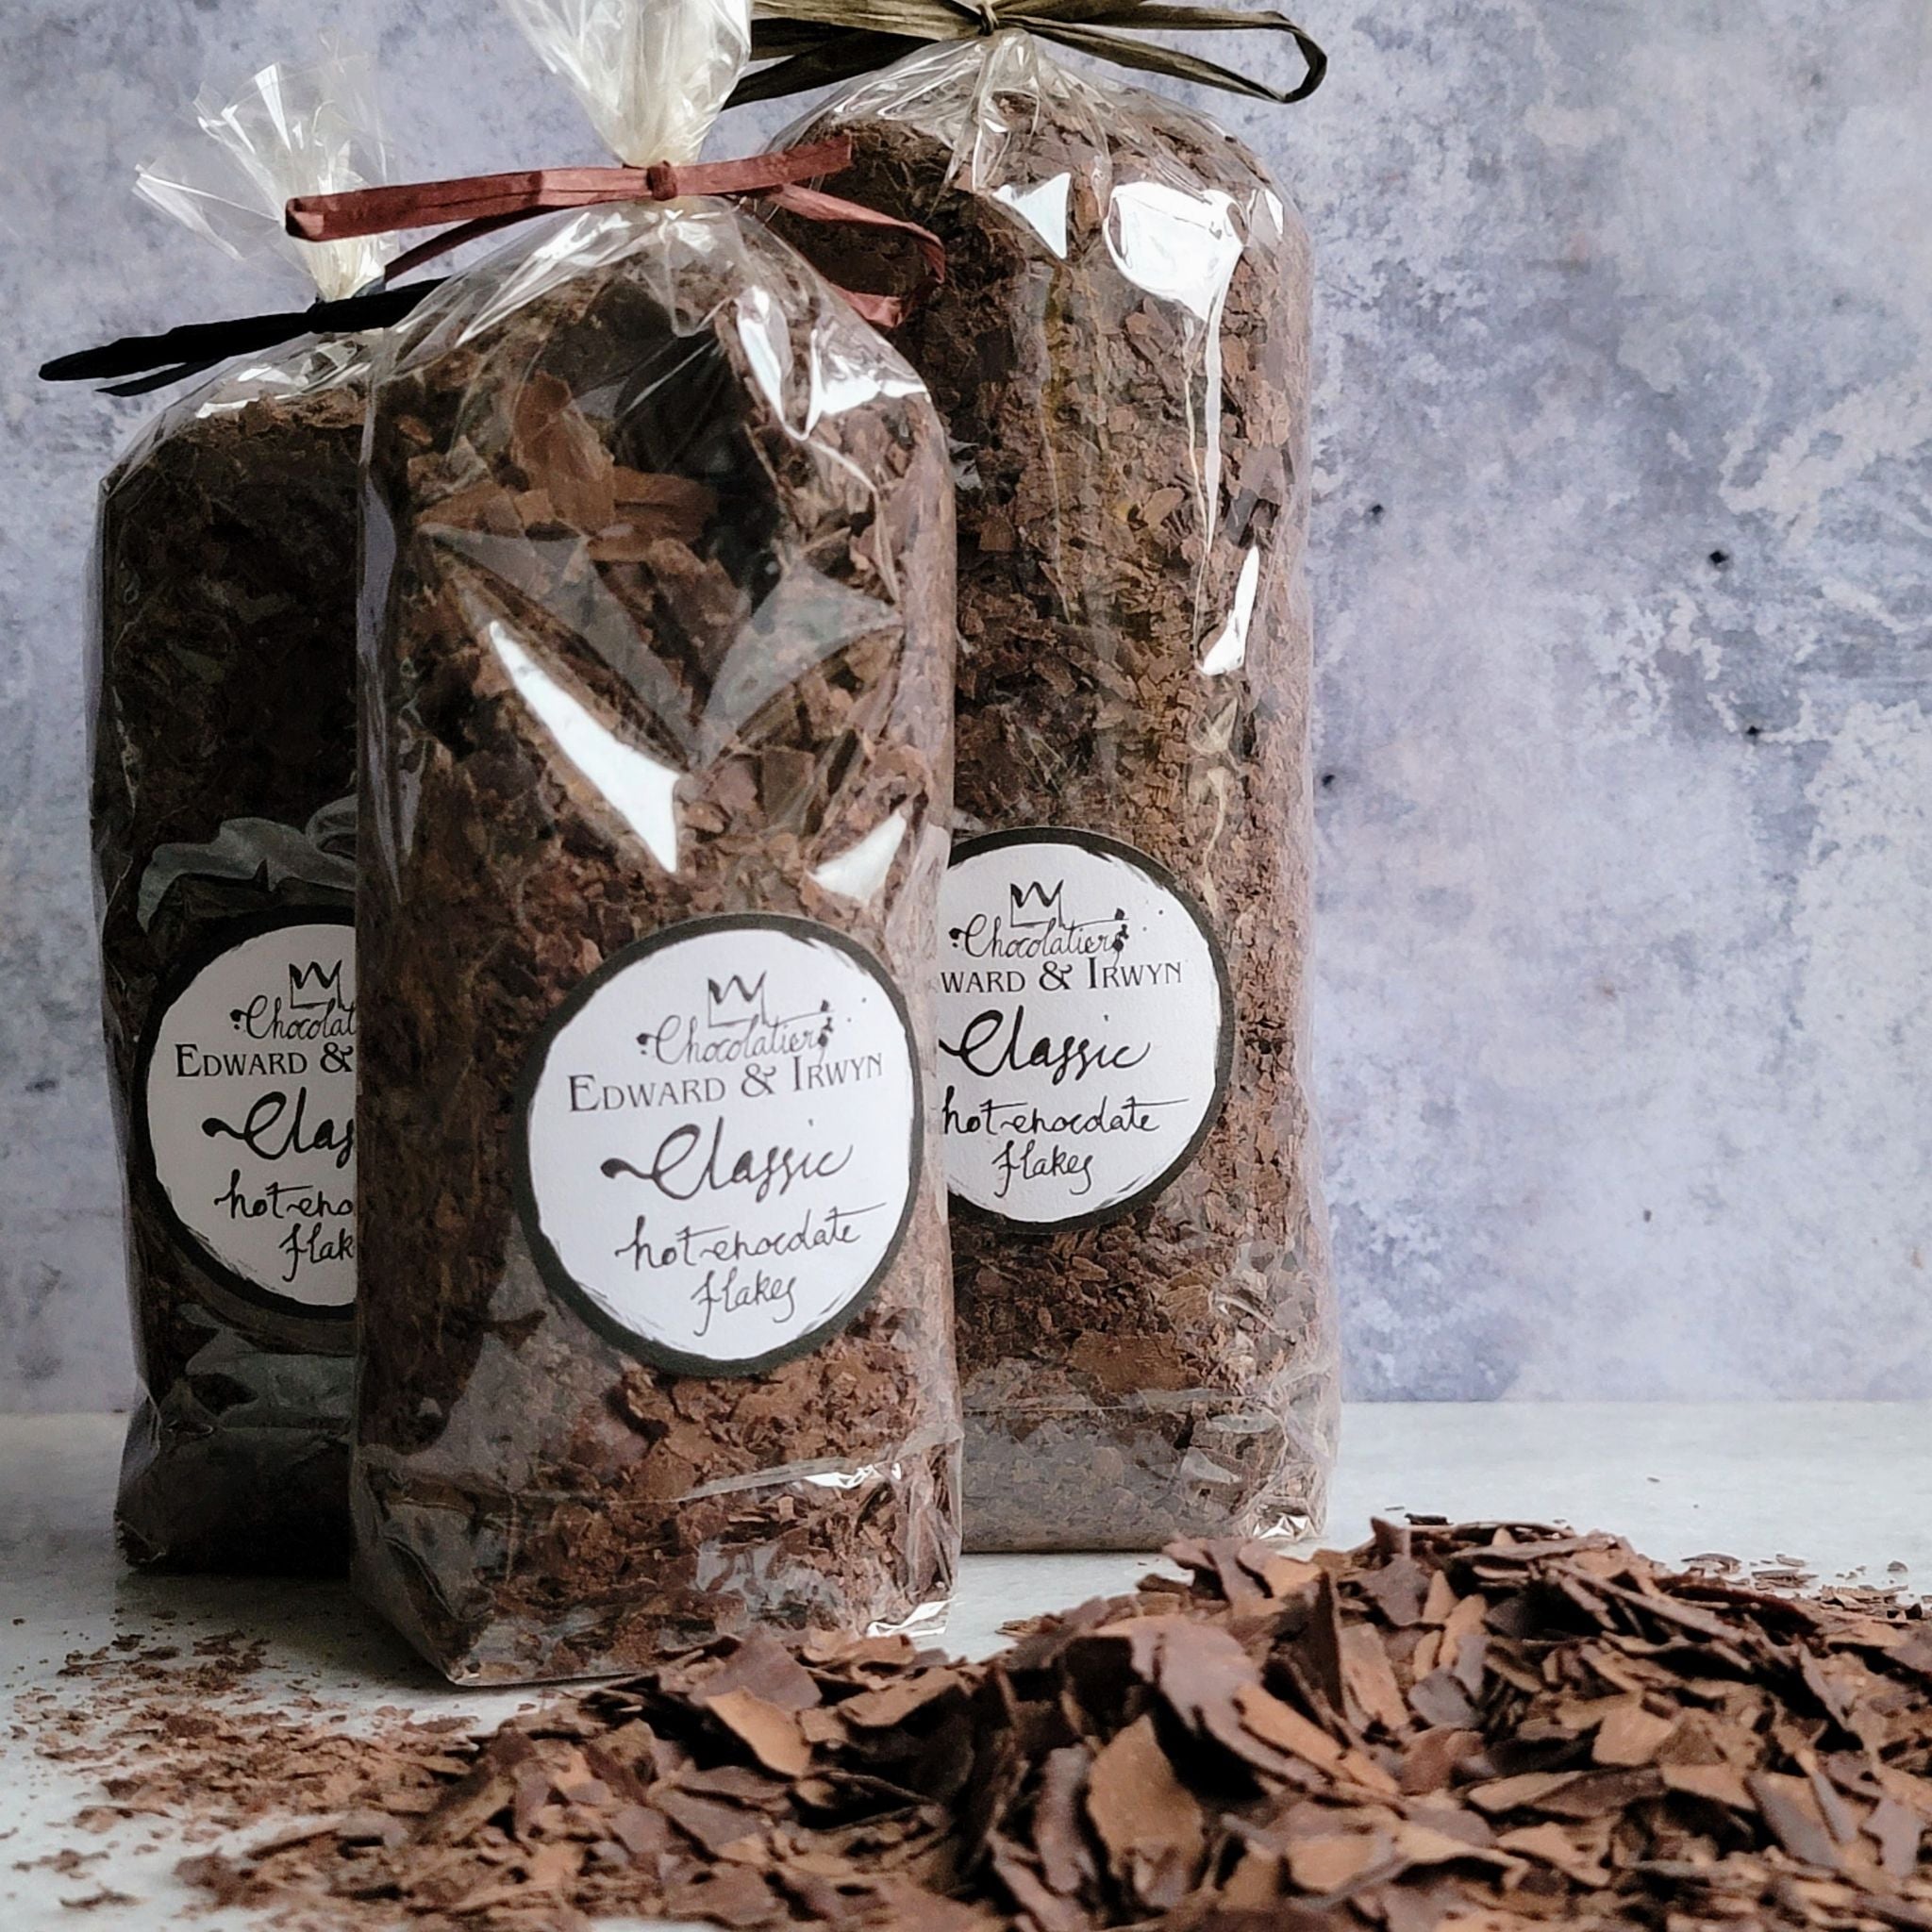 Classic Hot Chocolate Flakes